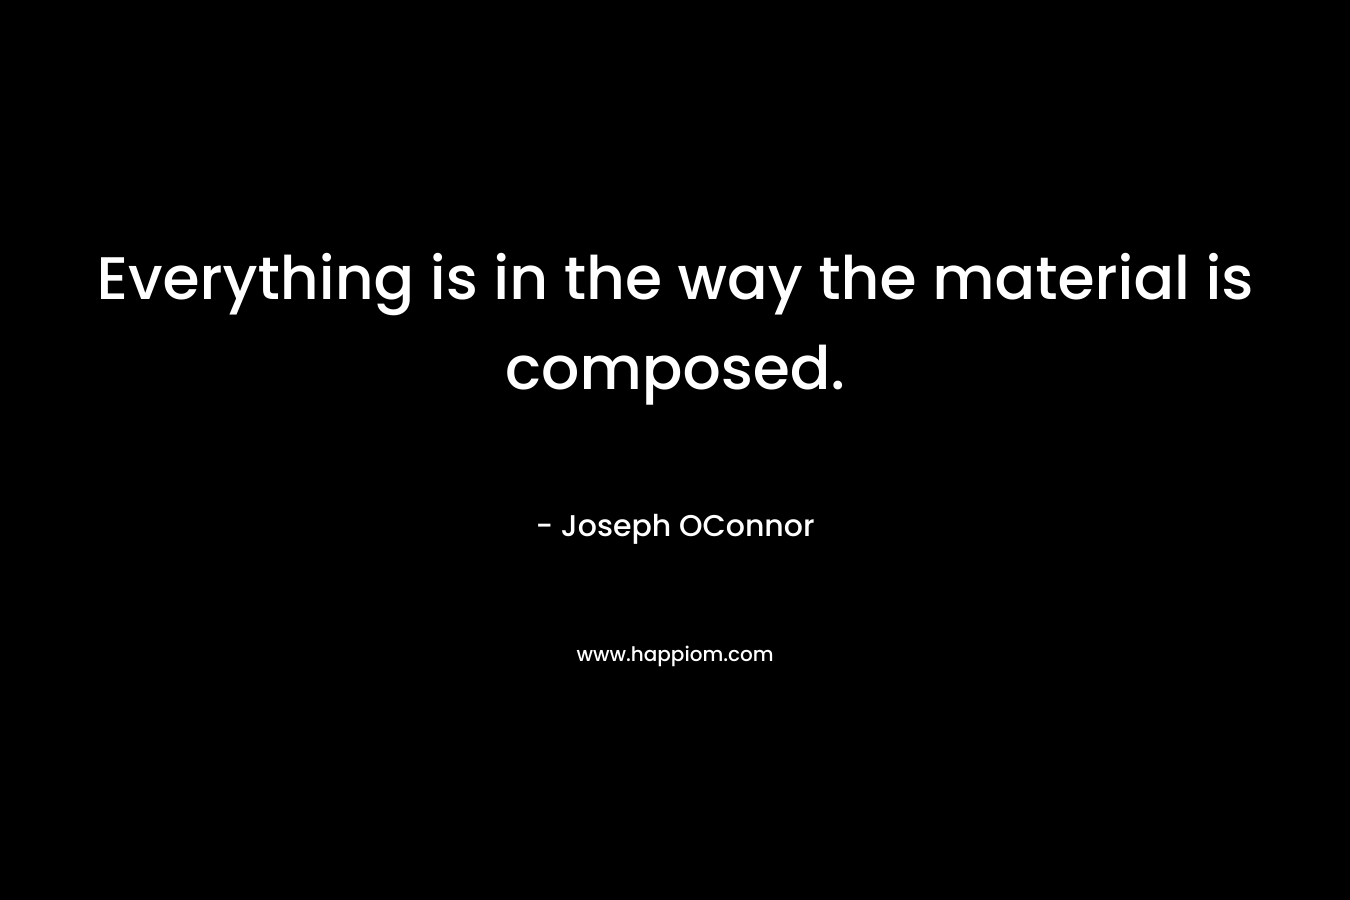 Everything is in the way the material is composed.